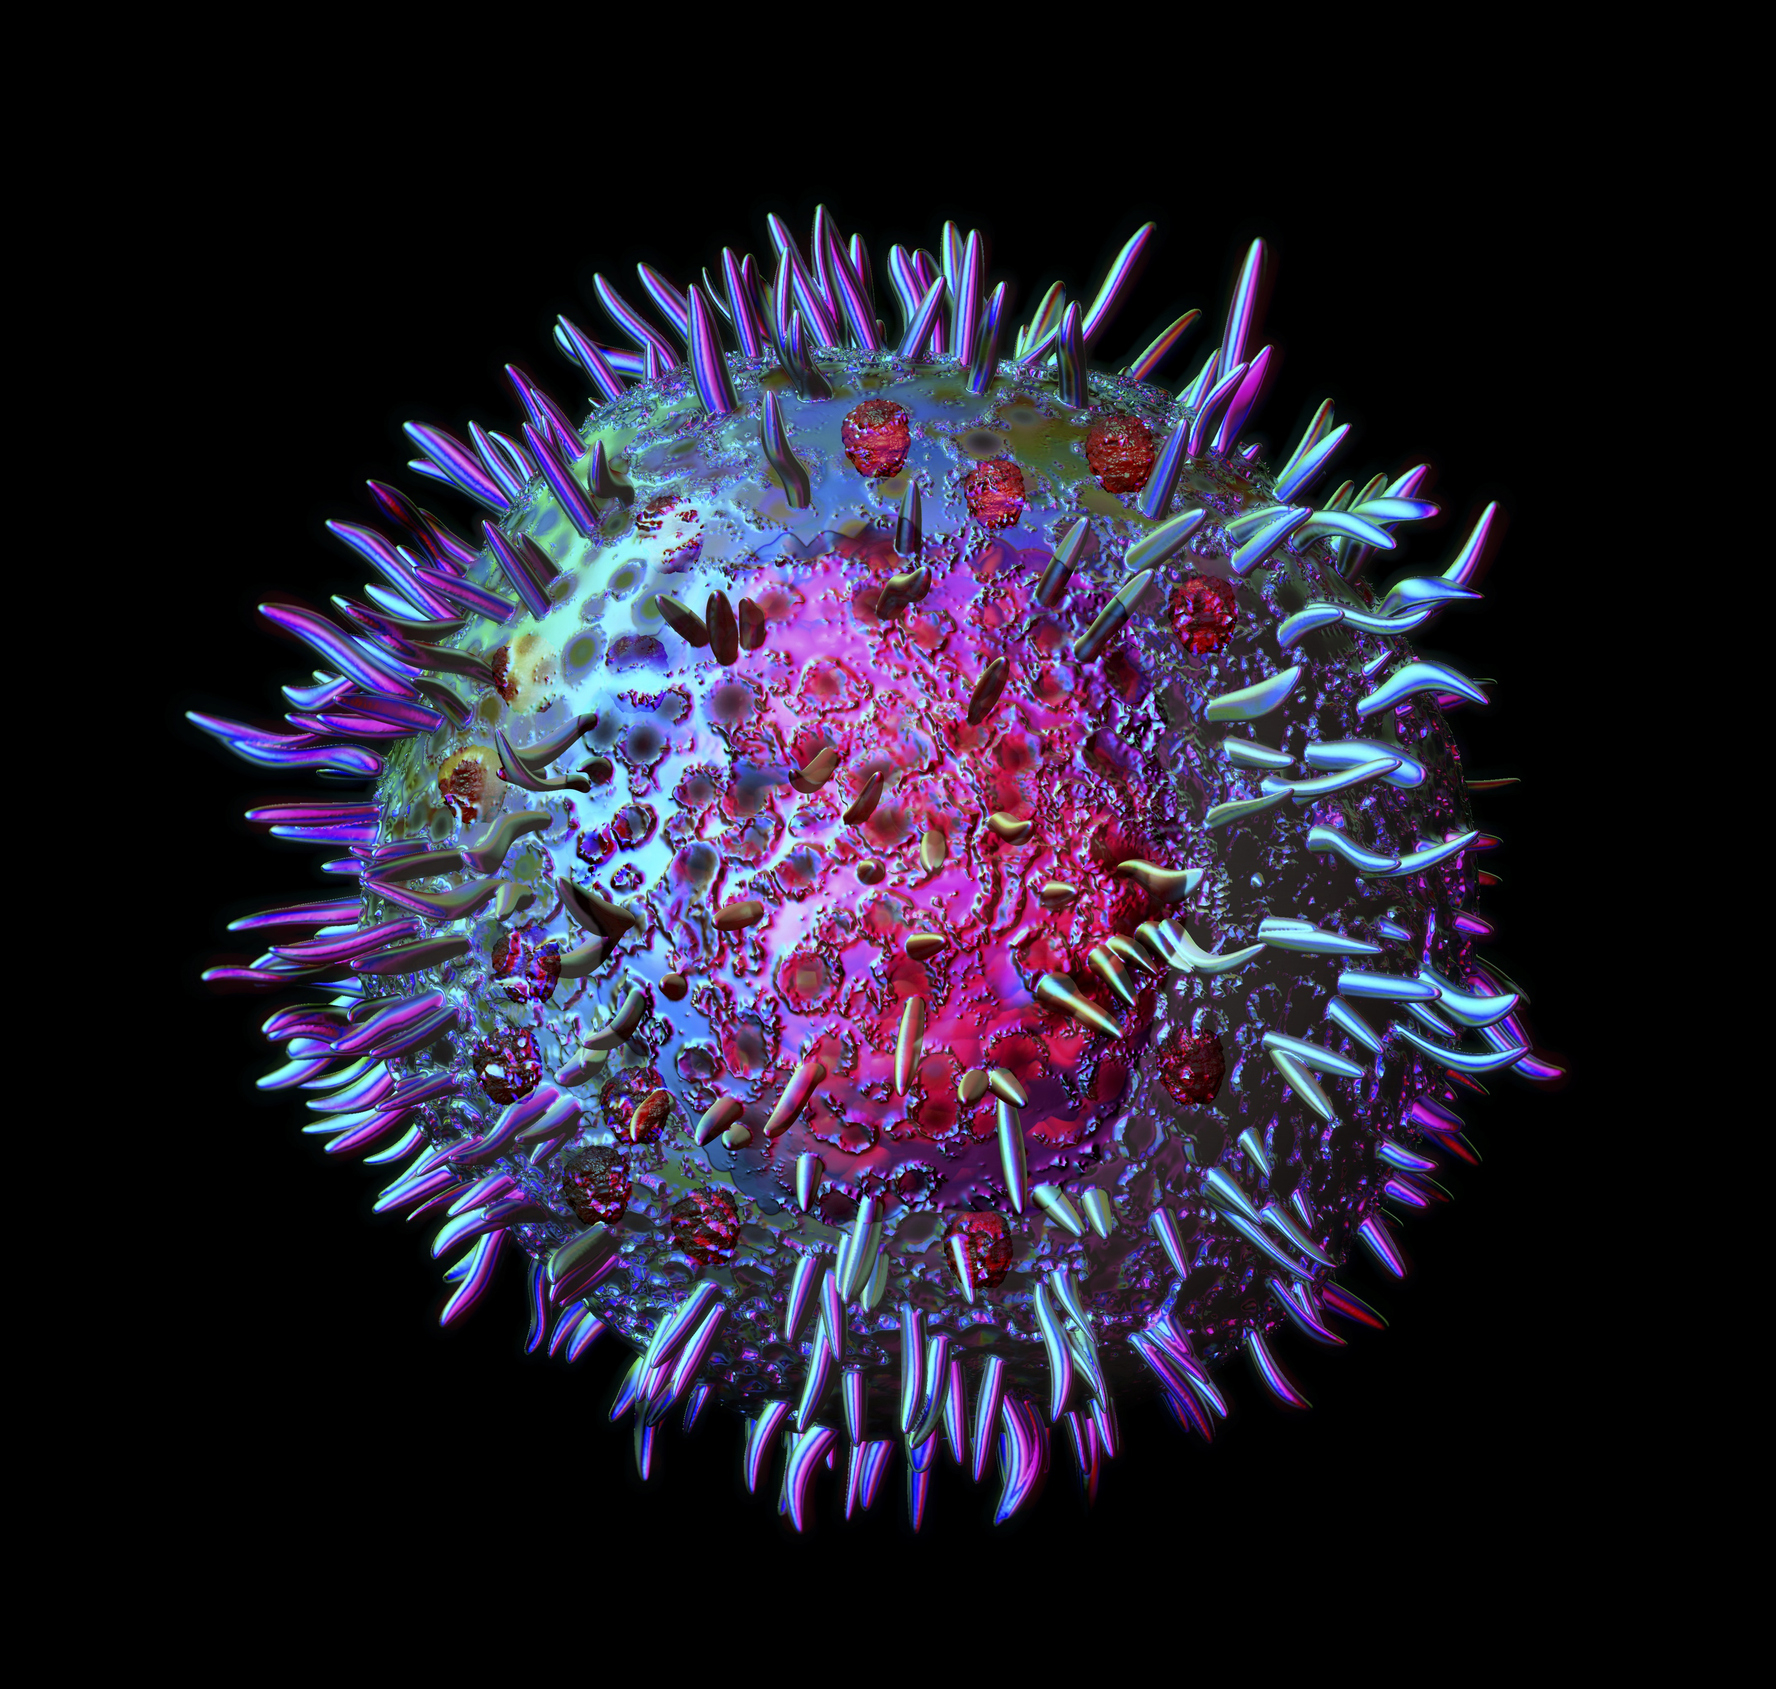 3D rendering of a detailed, spiky virus-like particle against a black background